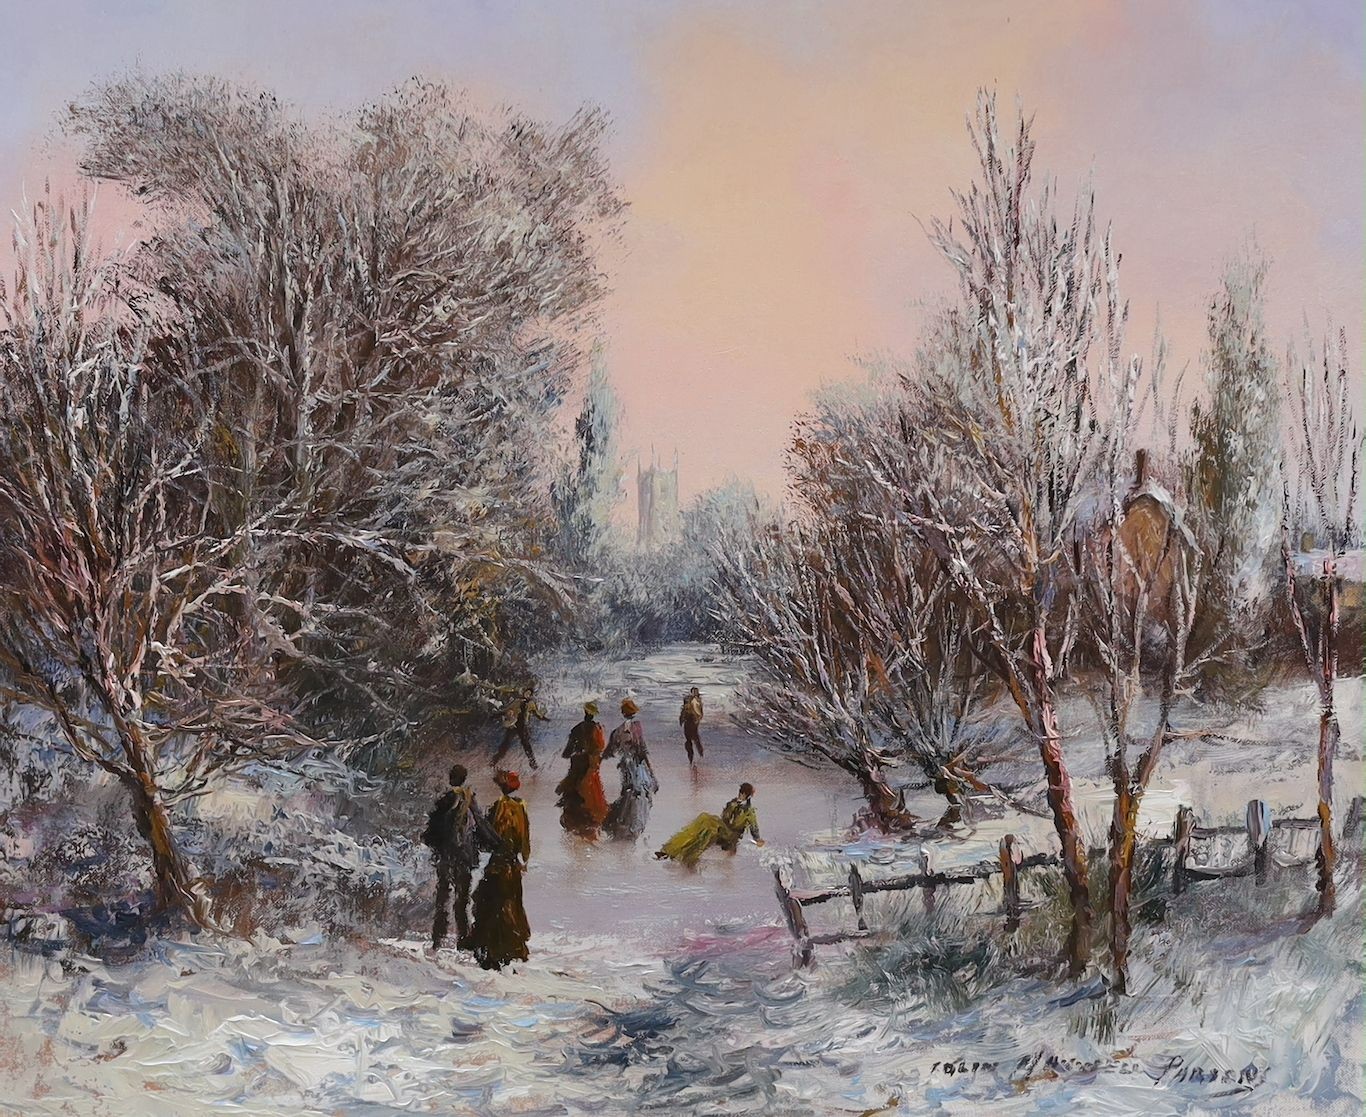 Colin Maxwell Parsons (1936-), oil on canvas, Victorian skating scene, signed, 50 x 60cm